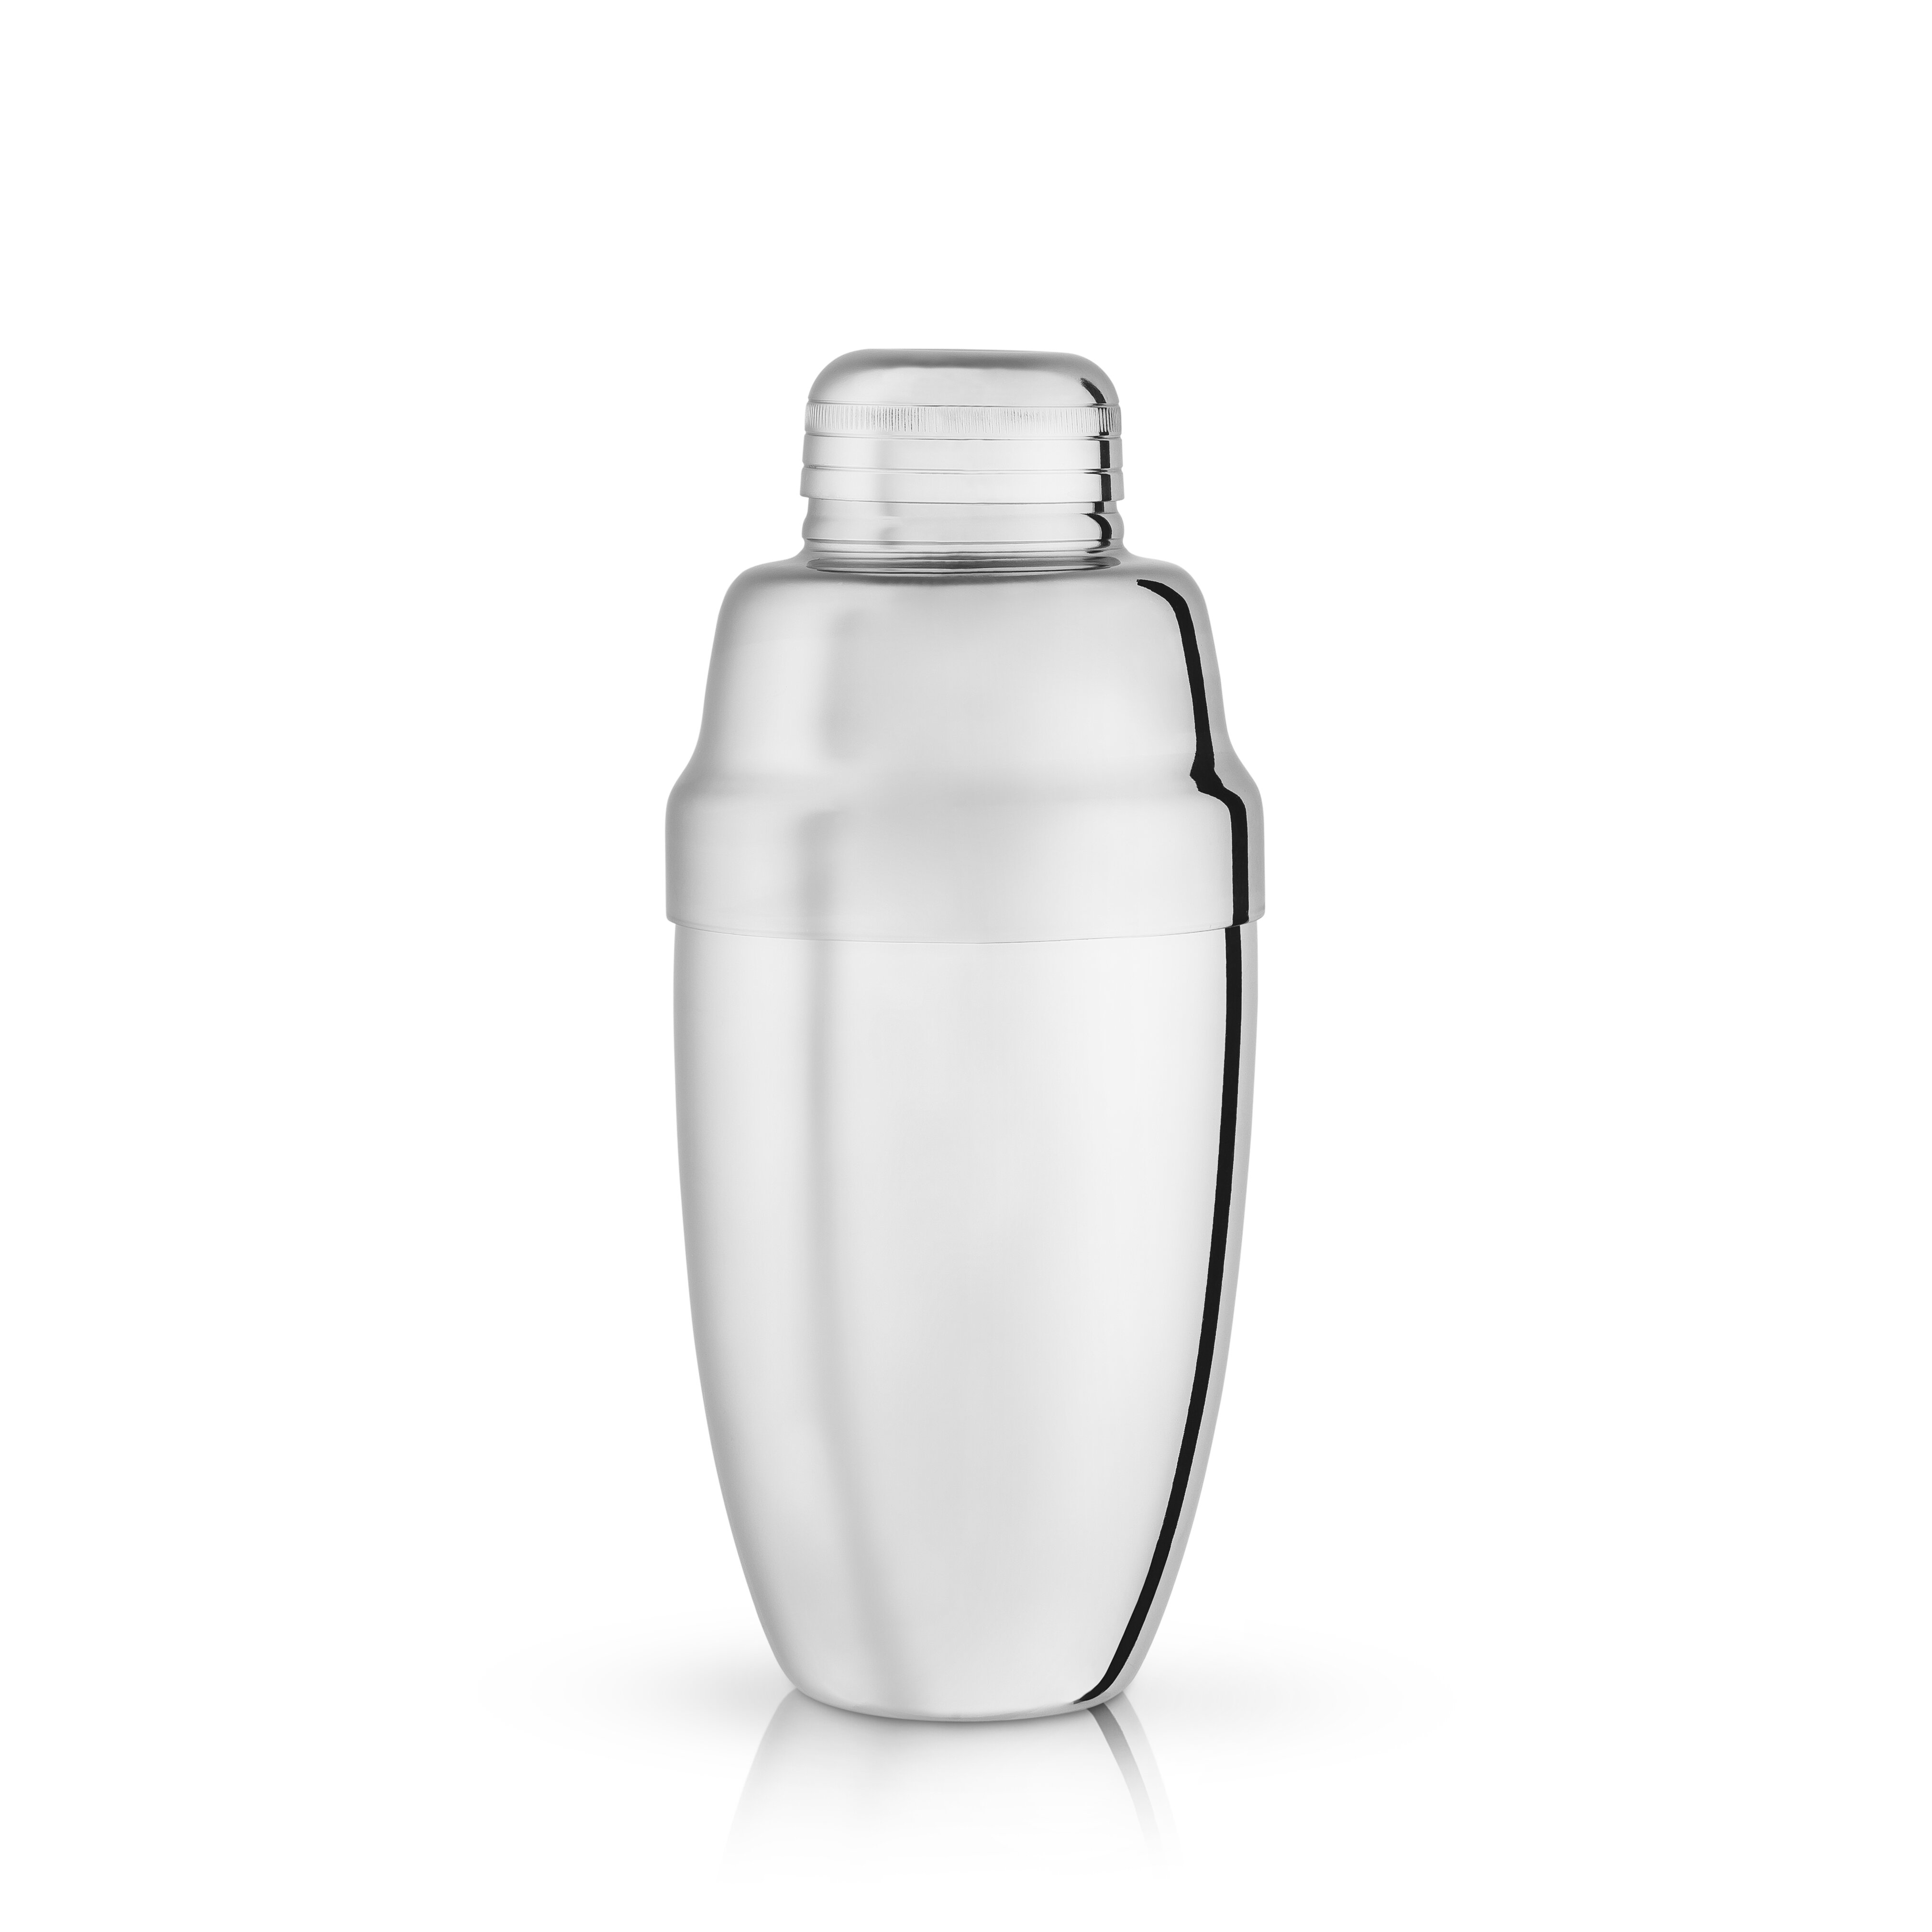  True Contour Cocktail Shaker, 18 oz Stainless Steel